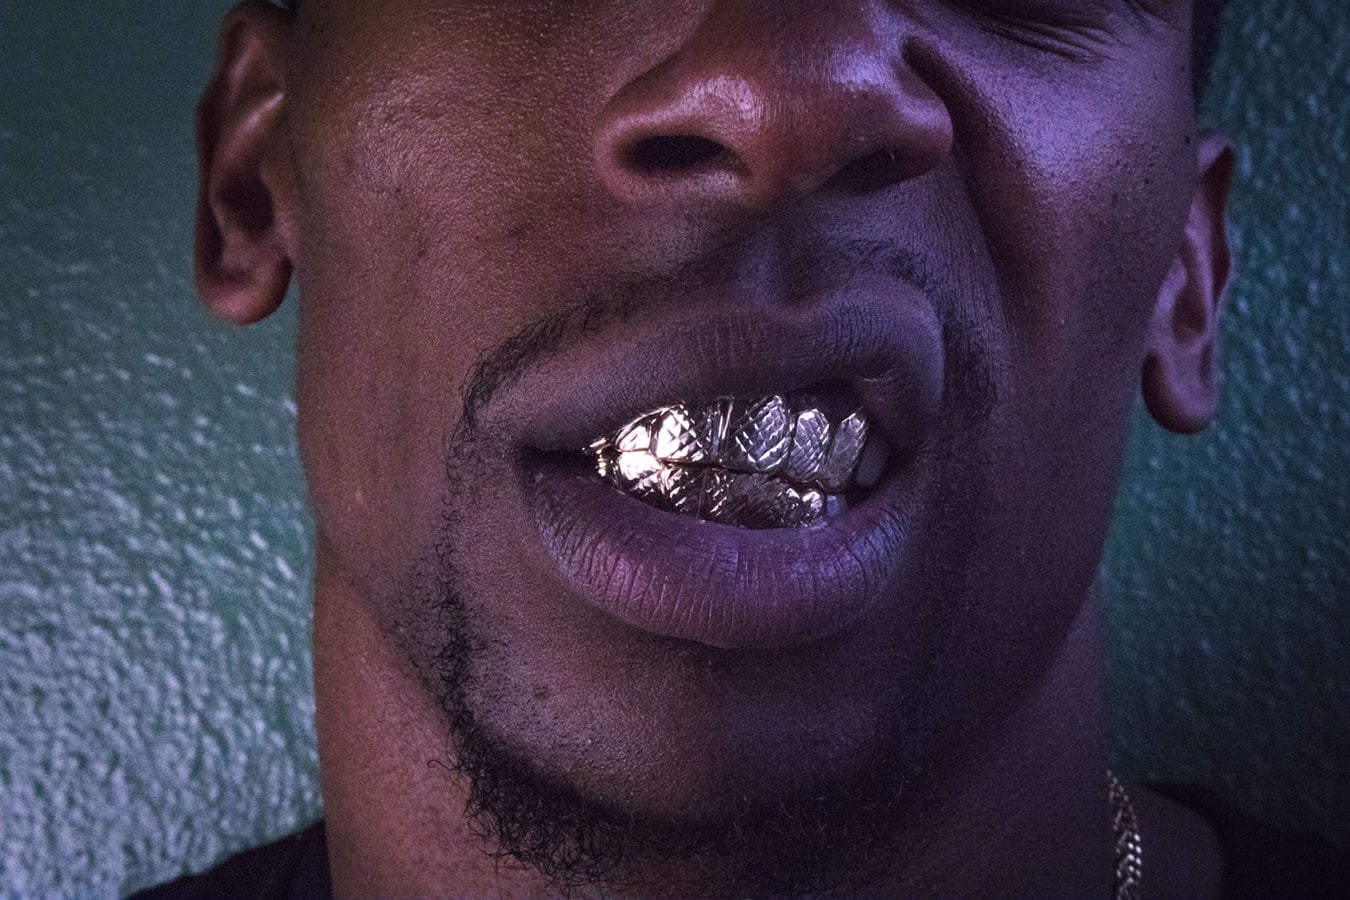 What is grillz?